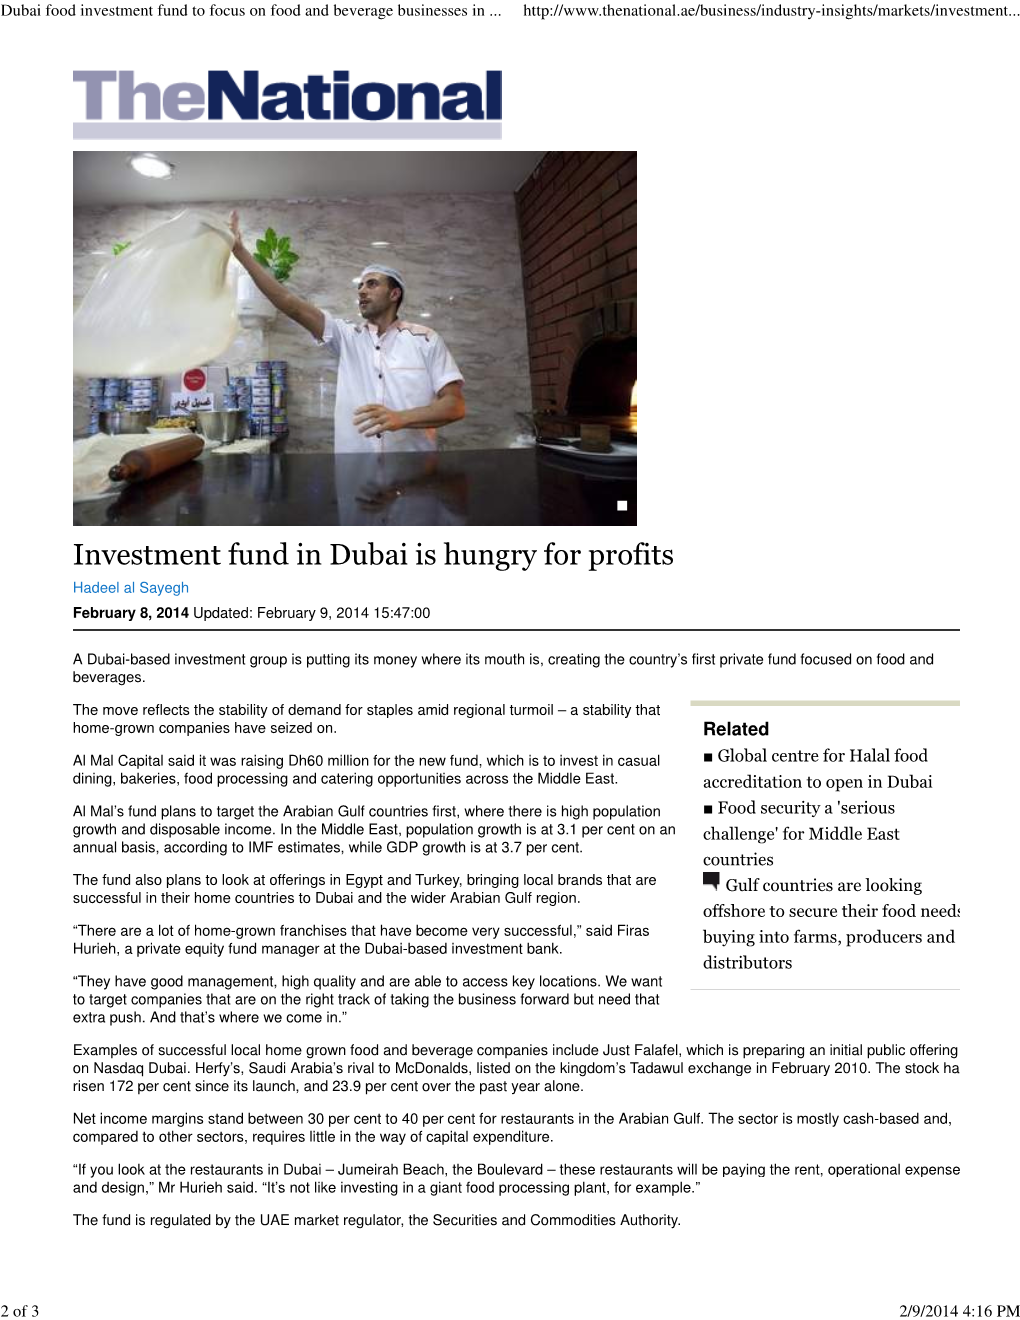 Dubai Food Investment Fund to Focus on Food and Beverage Businesses in